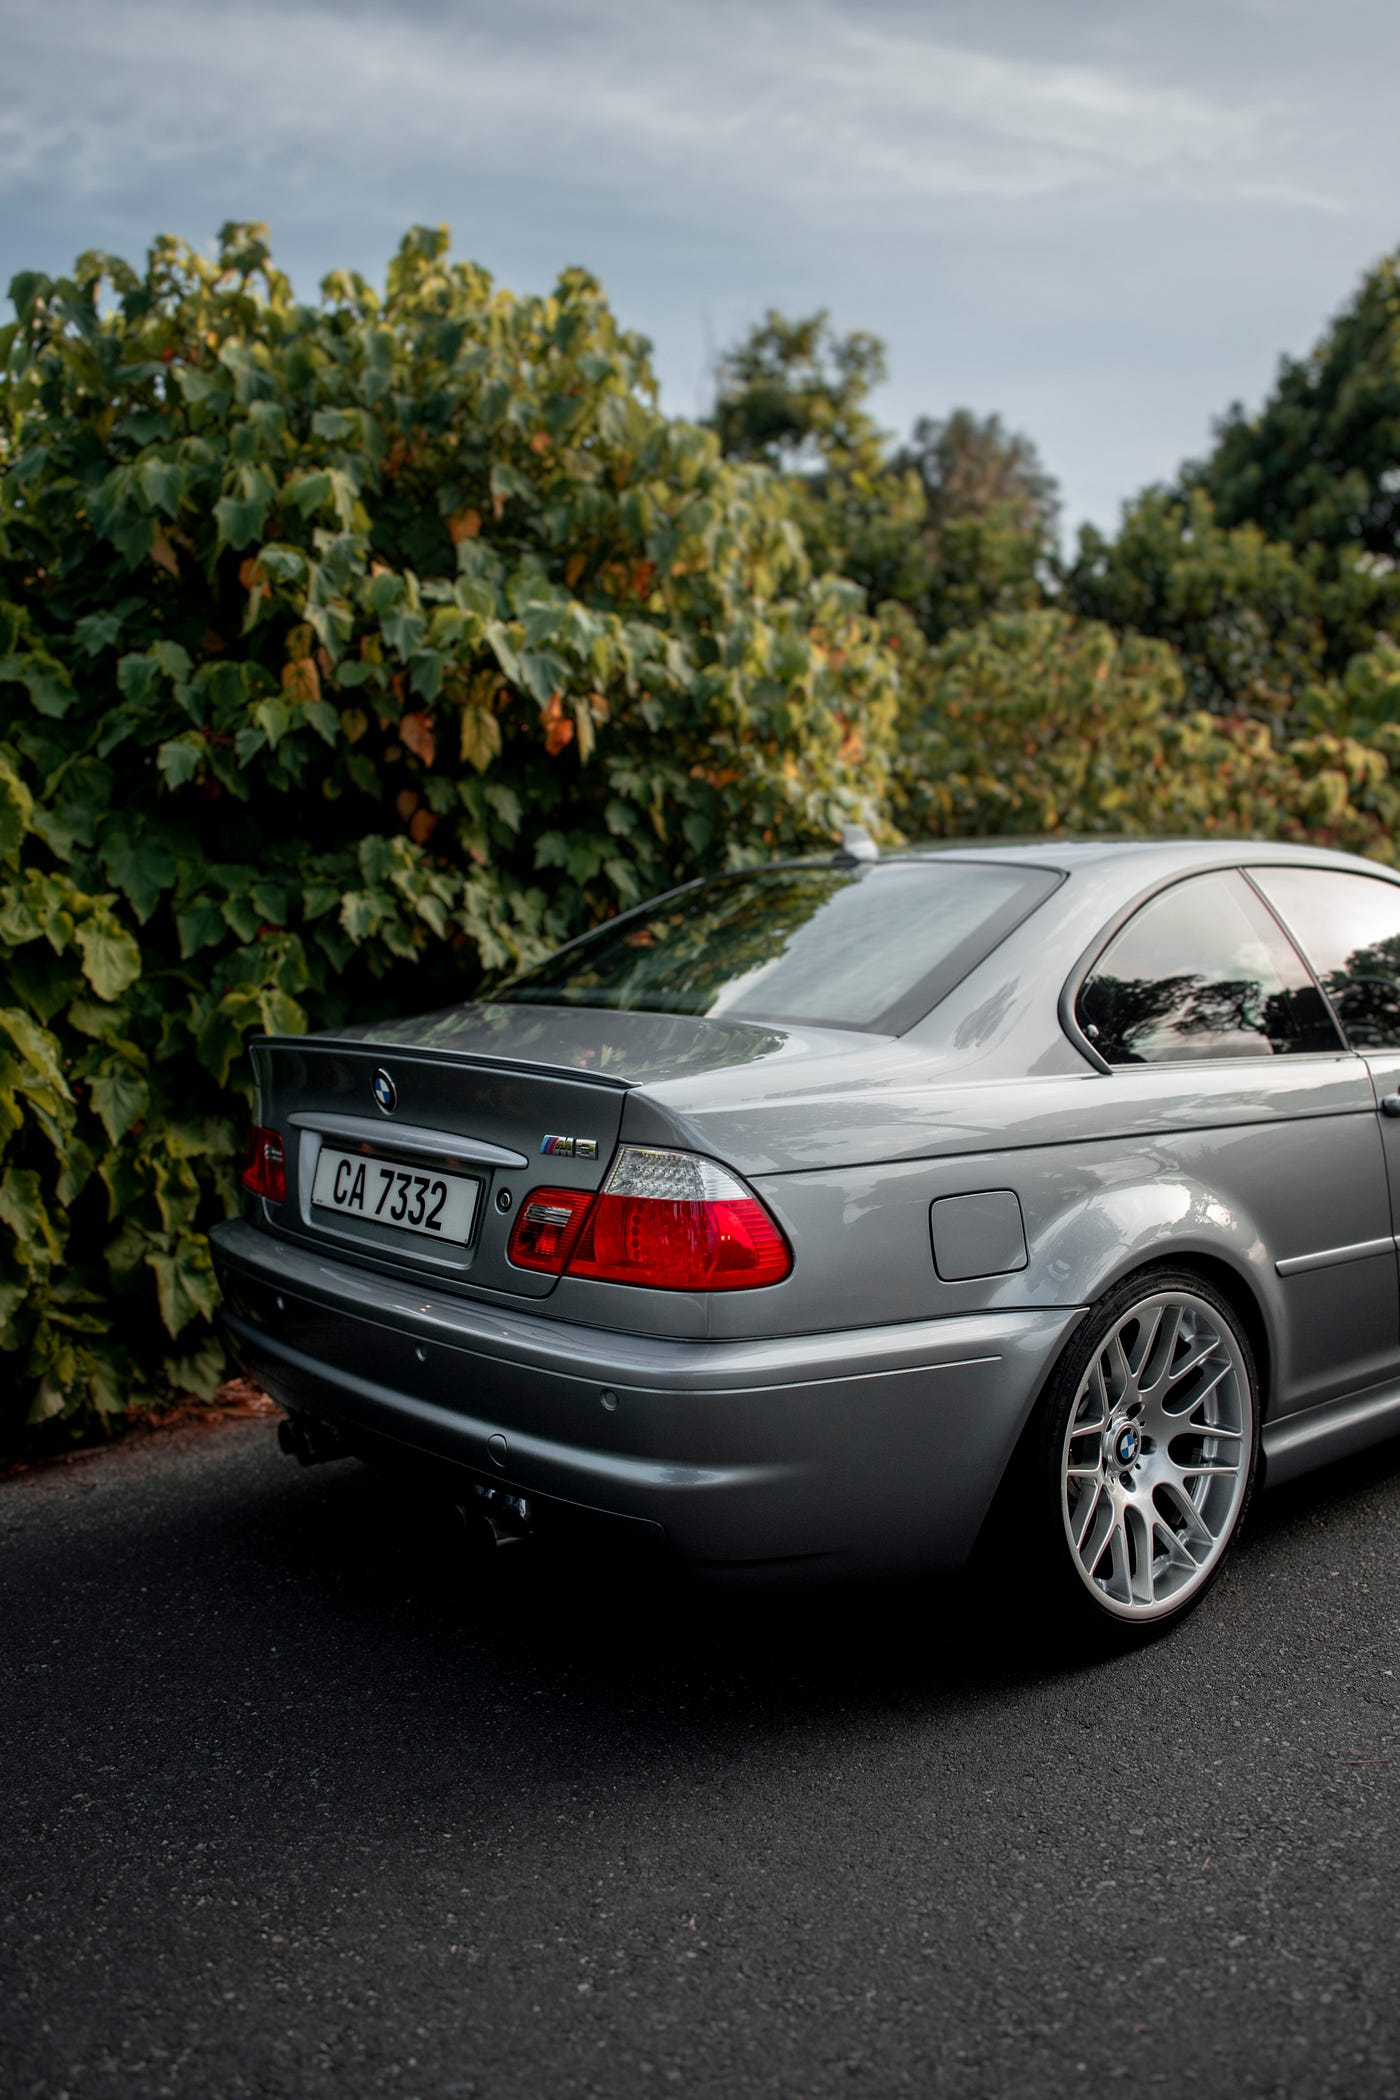 The E46 Is the BMW M3 Formula Perfected